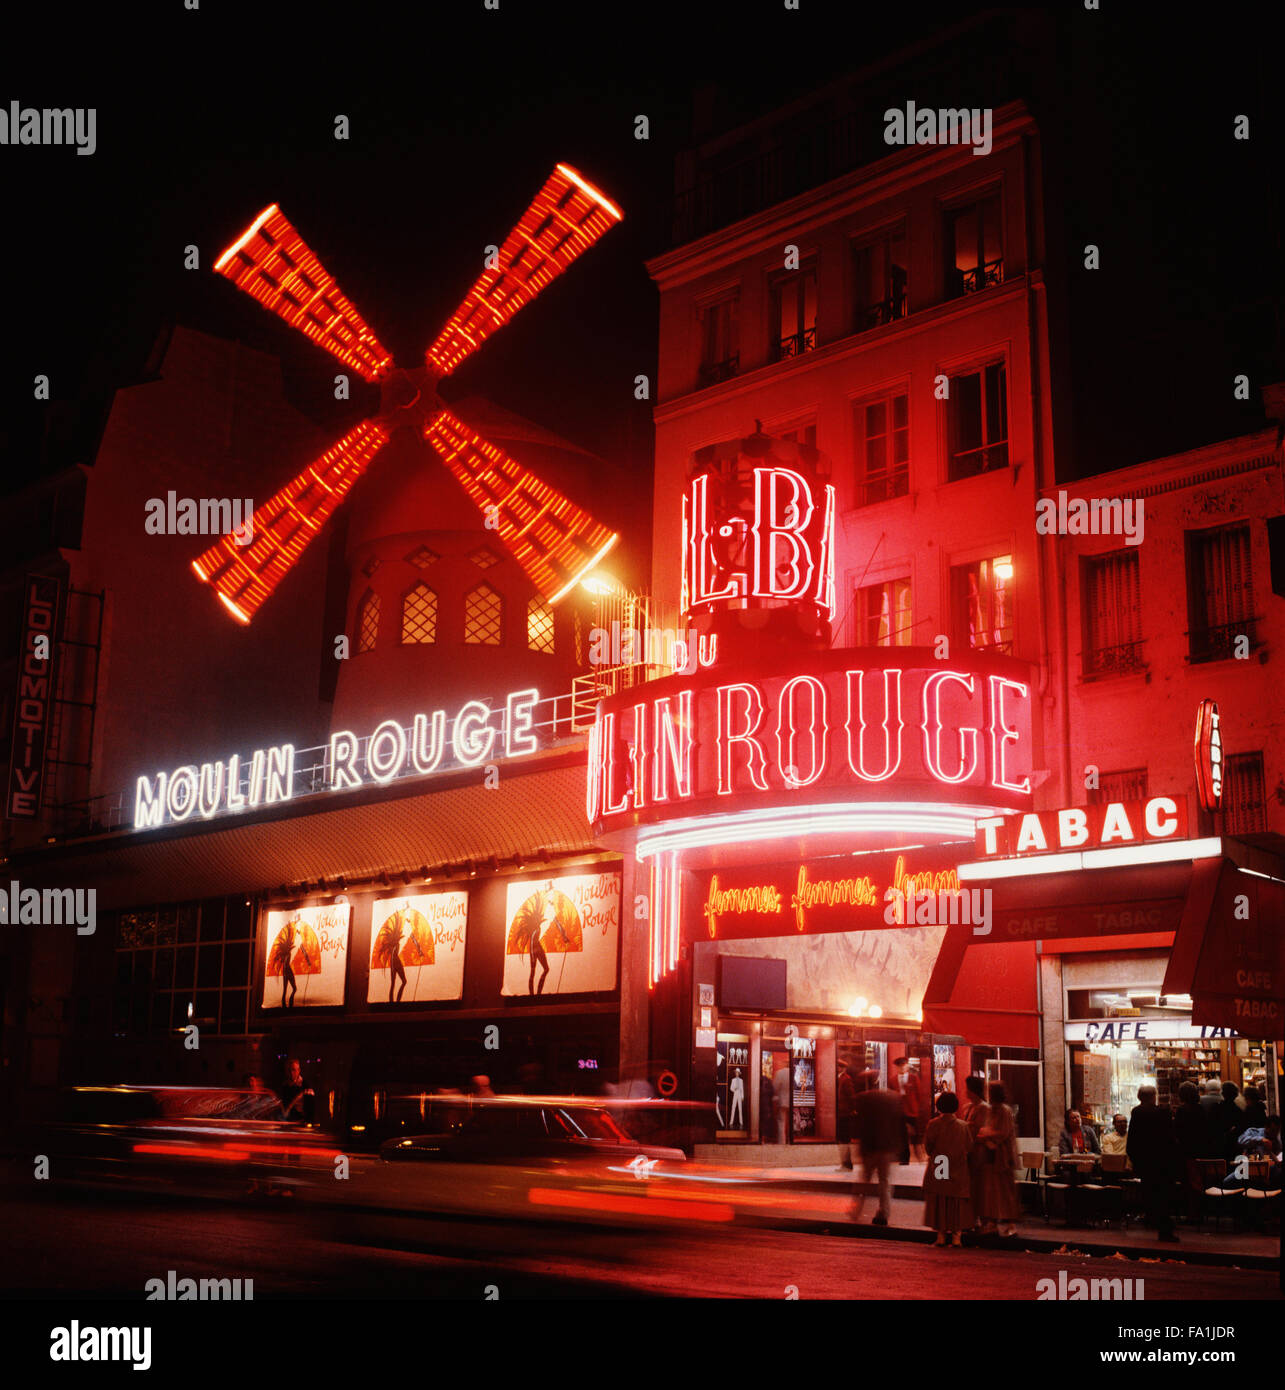 Moulin Rouge at night, Montmartre, Paris, France Stock Photo